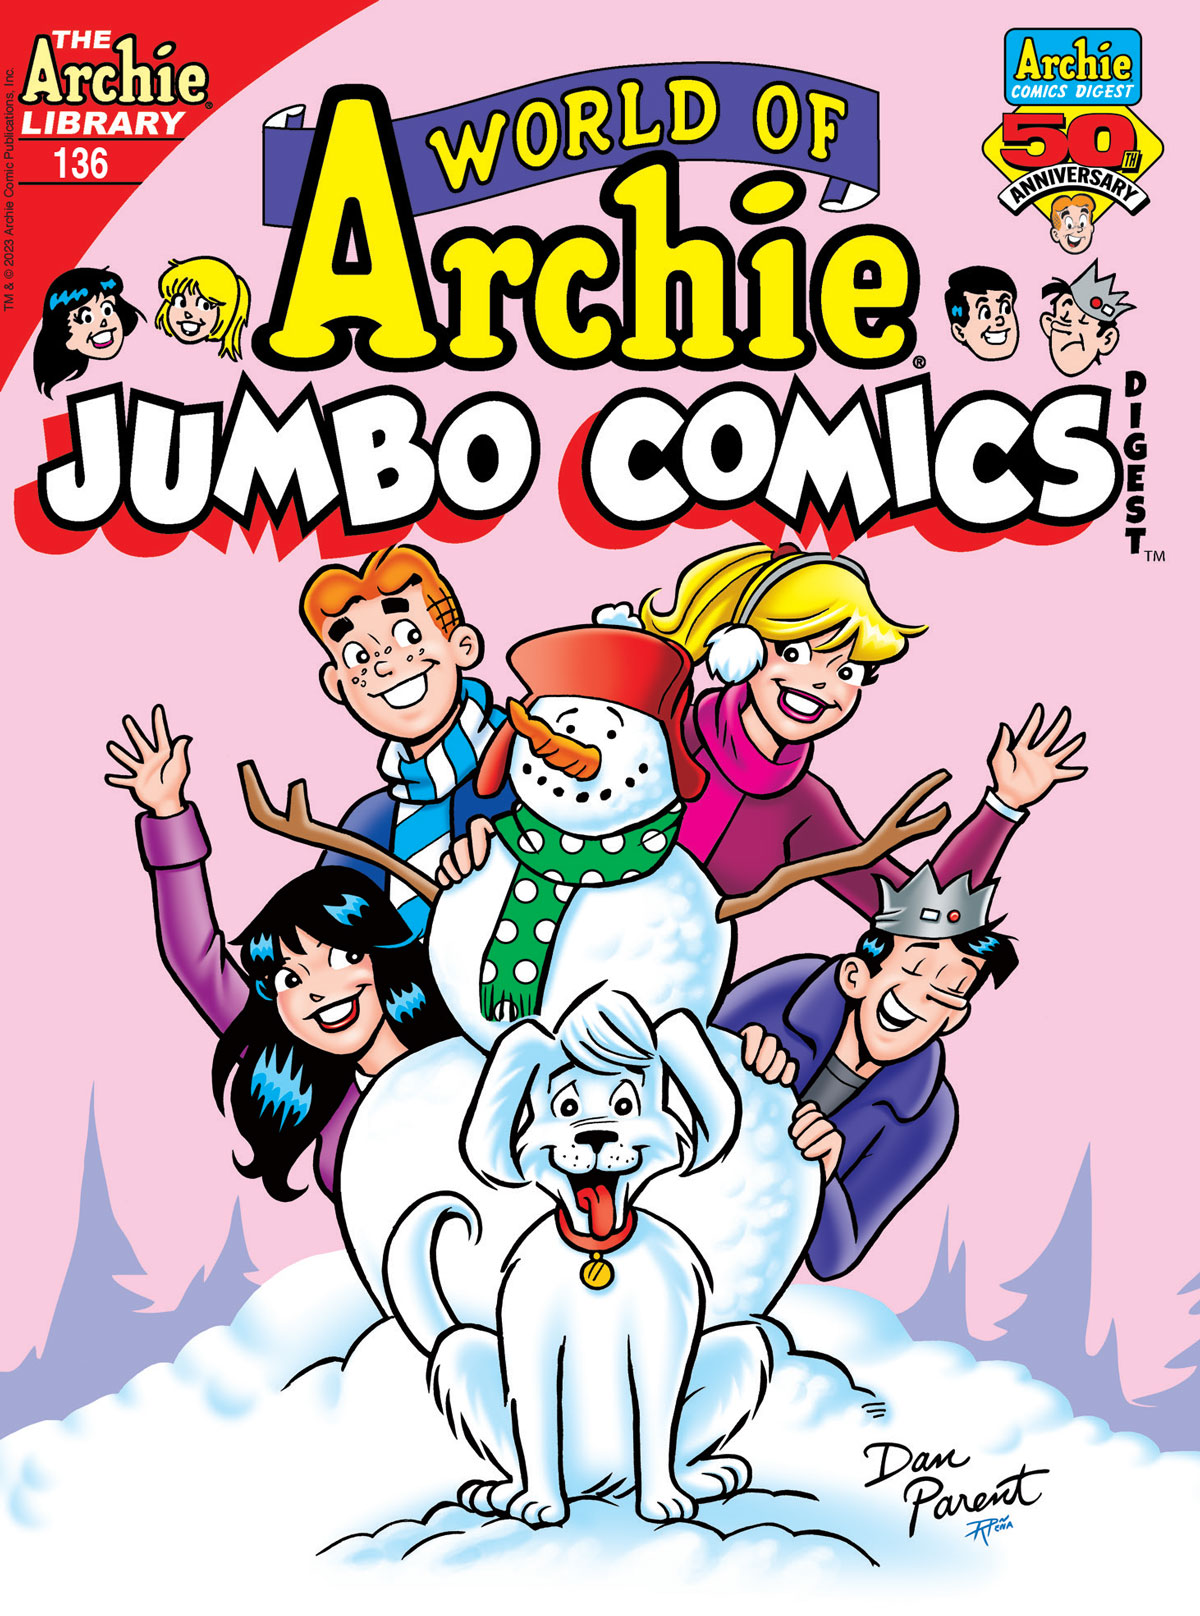 The cover of WORLD OF ARCHIE DIGEST #136. Archie, Betty, Veronica, Jughead, and Hot Dog wave at the reader from behind a snow man.